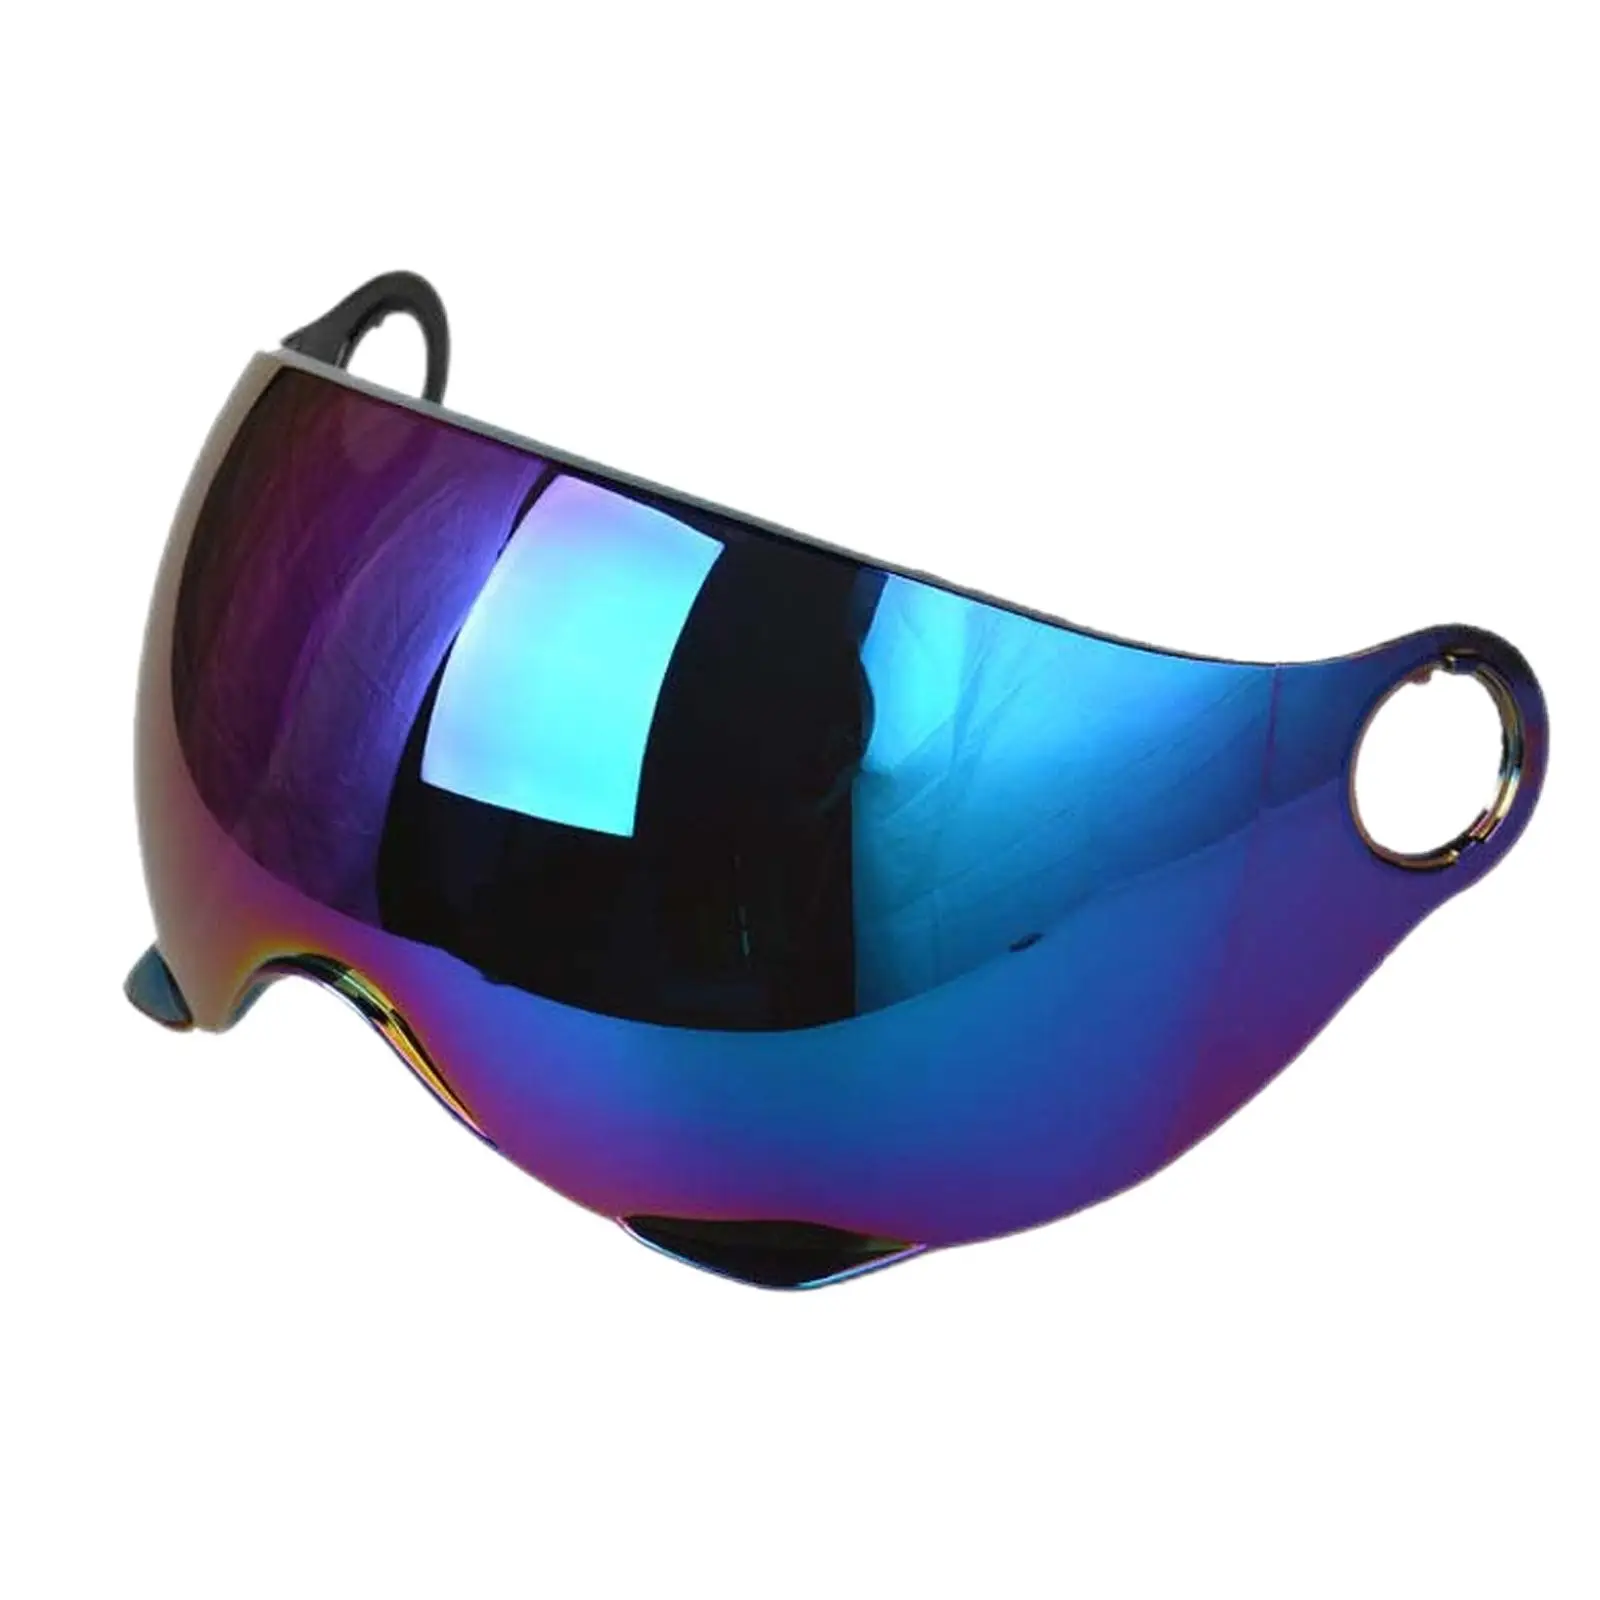  Visor Lens, Motorcycle Replace   Windproof Colorful Retro Wind,  Snap Open .